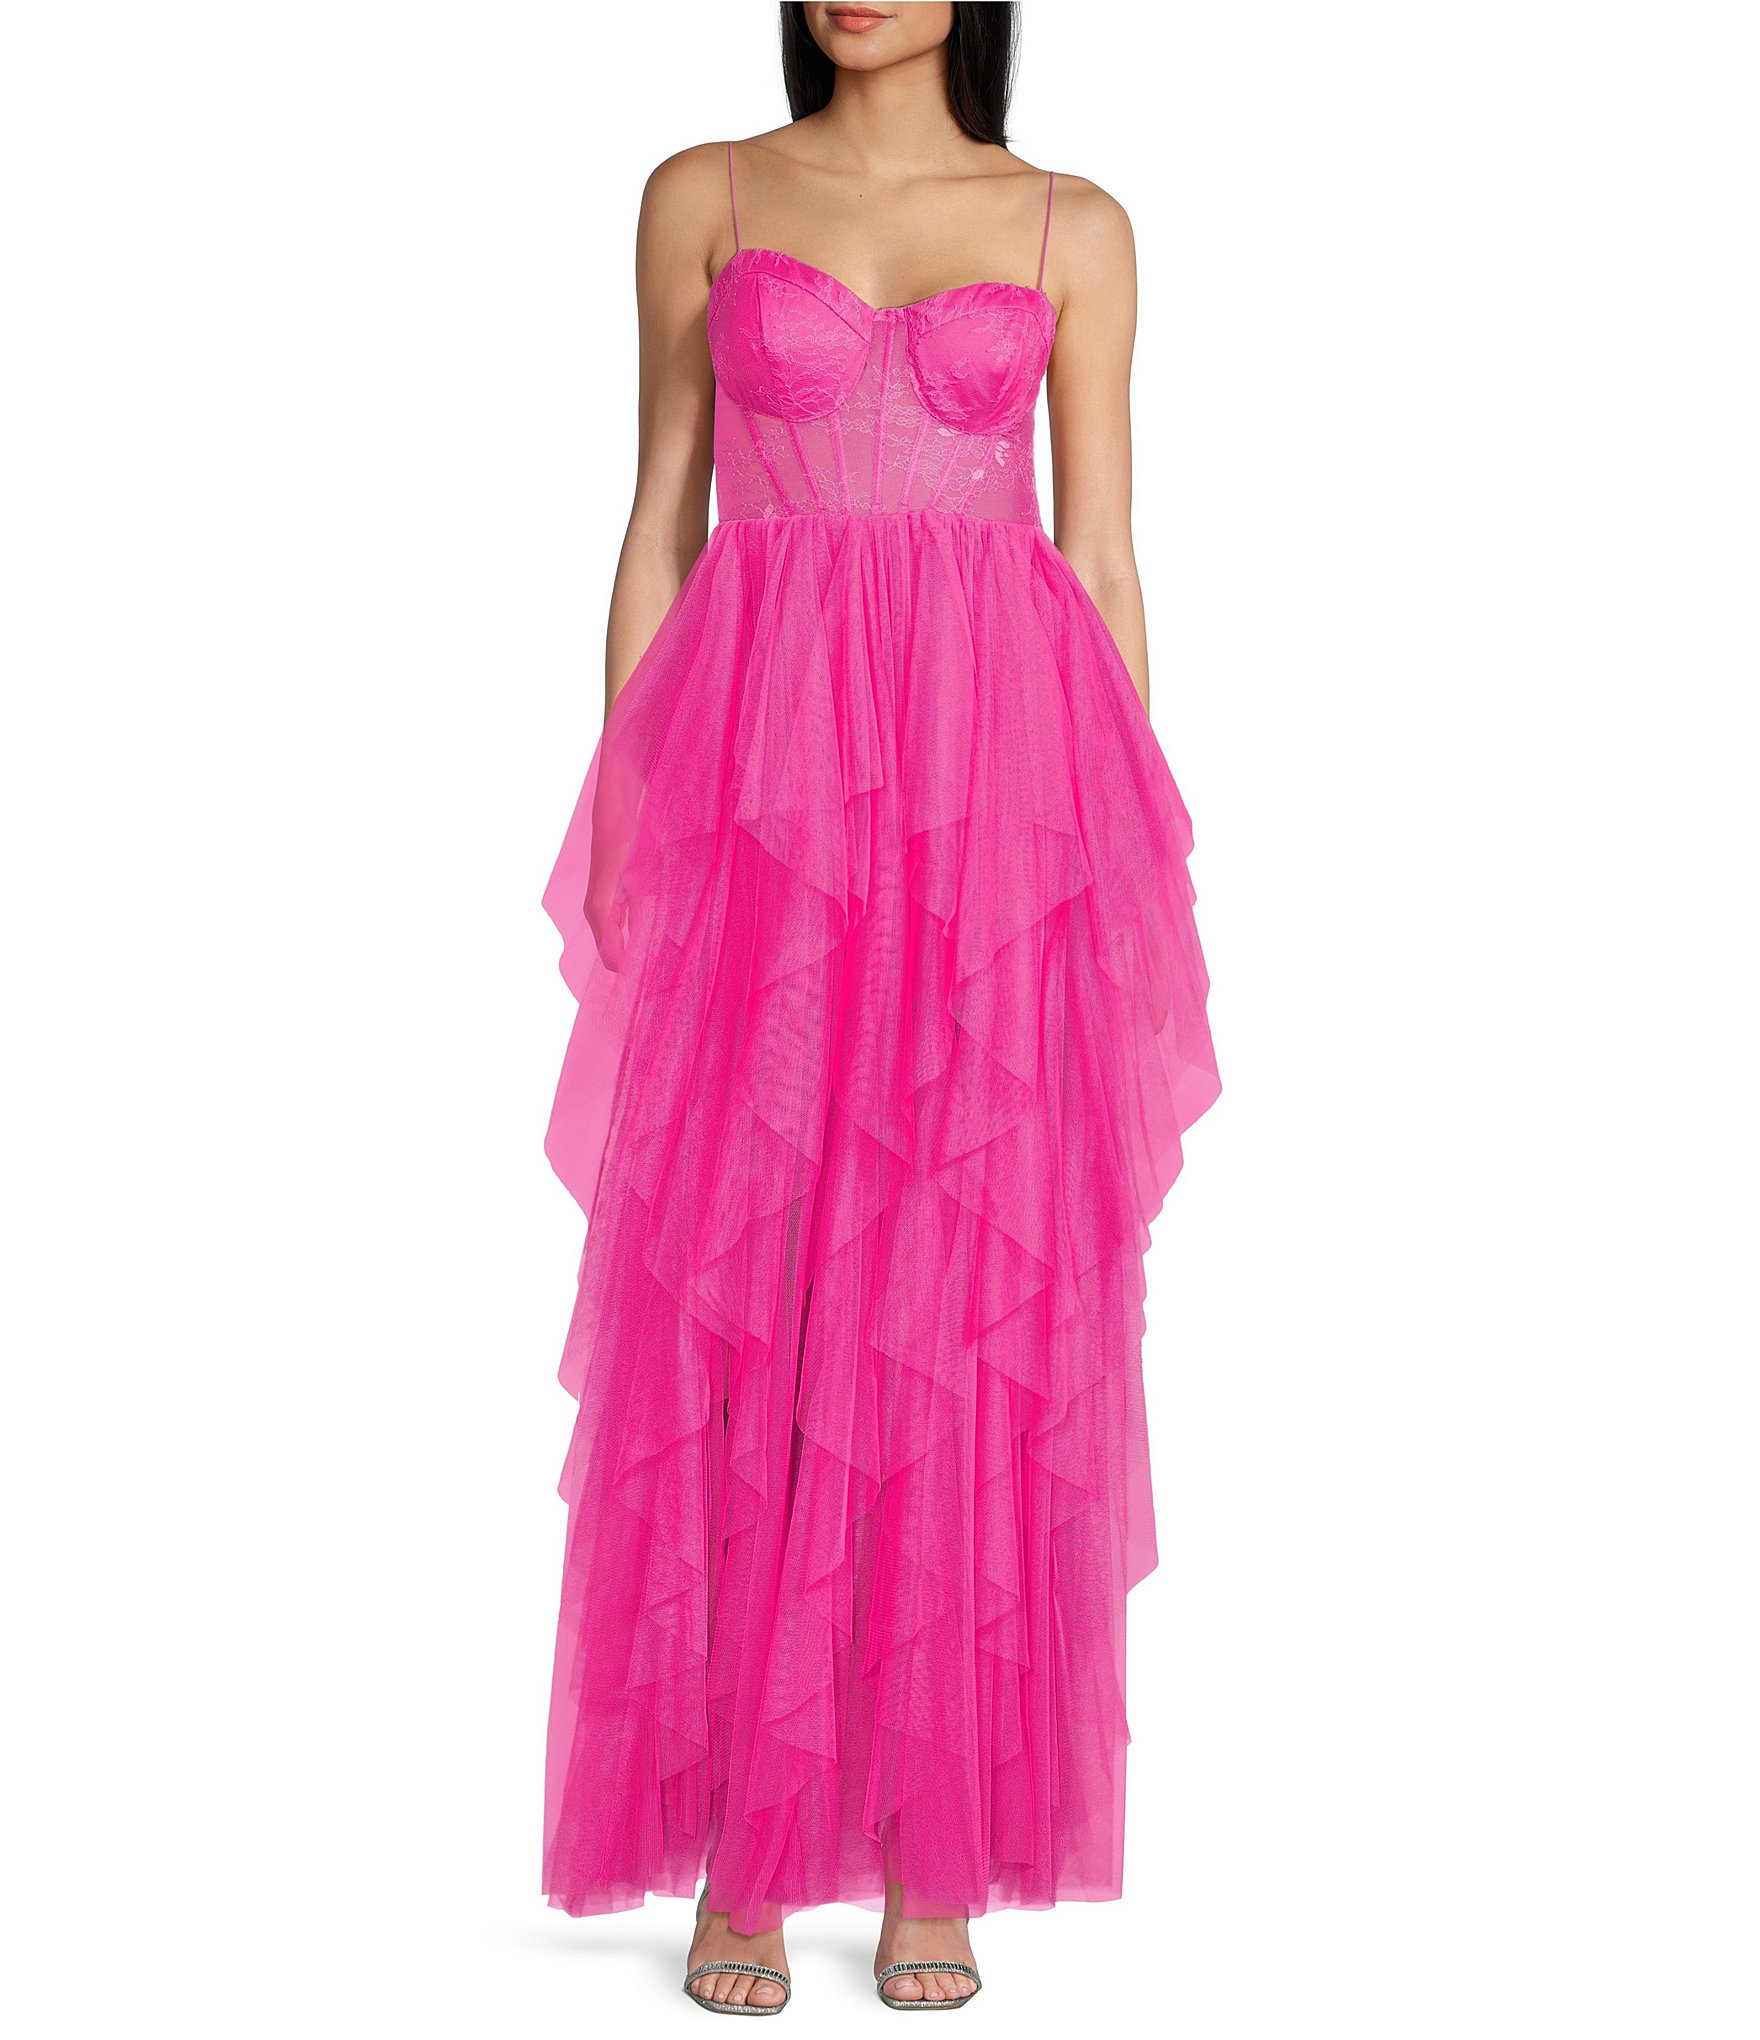 Blondie Nites Front Cut-Out Sweetheart Neck Ruffled Tulle Tiered Ball Gown